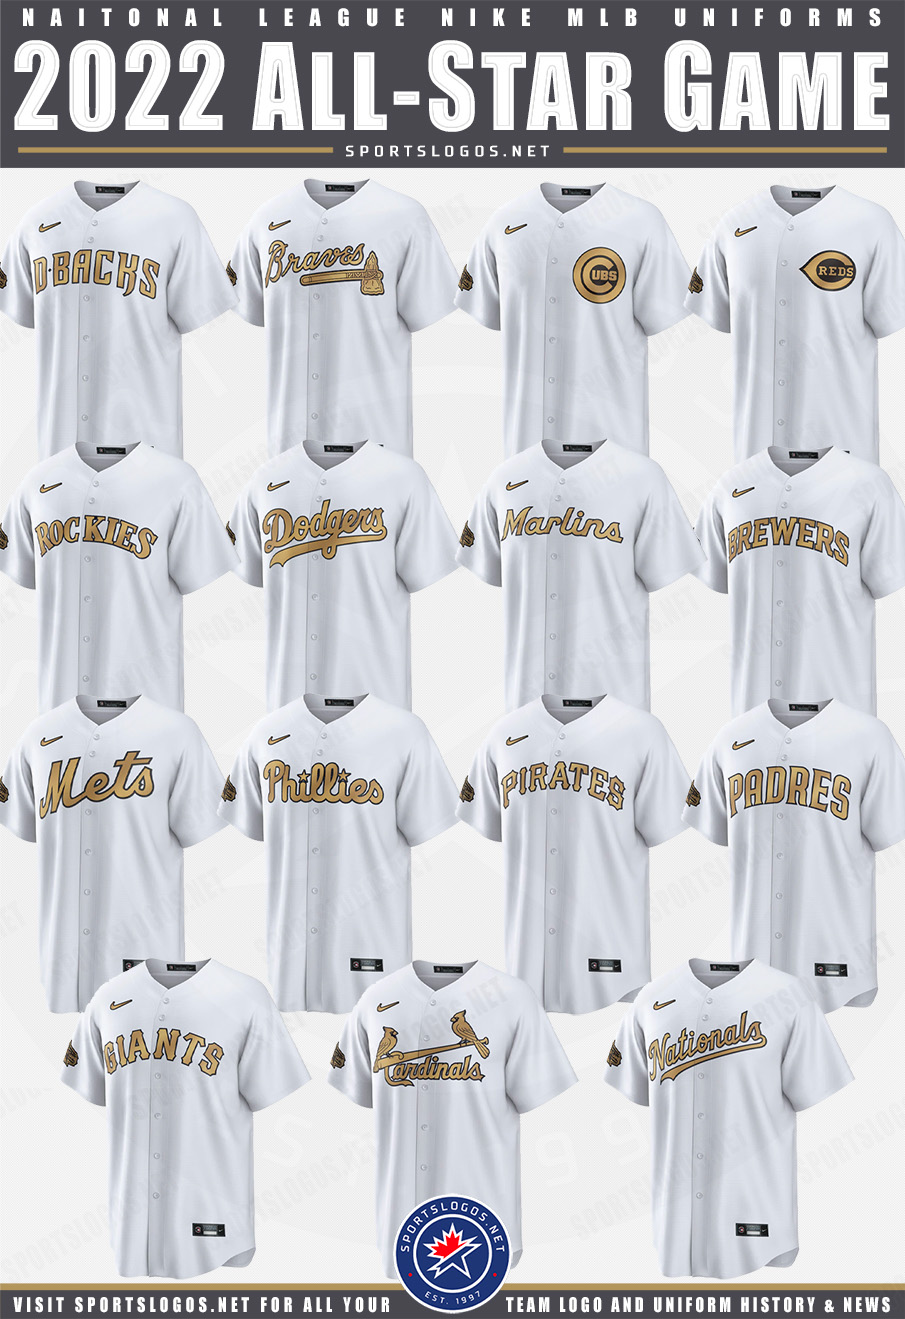 MLB Unveils Gold and Grey 2022 AllStar Game Uniforms